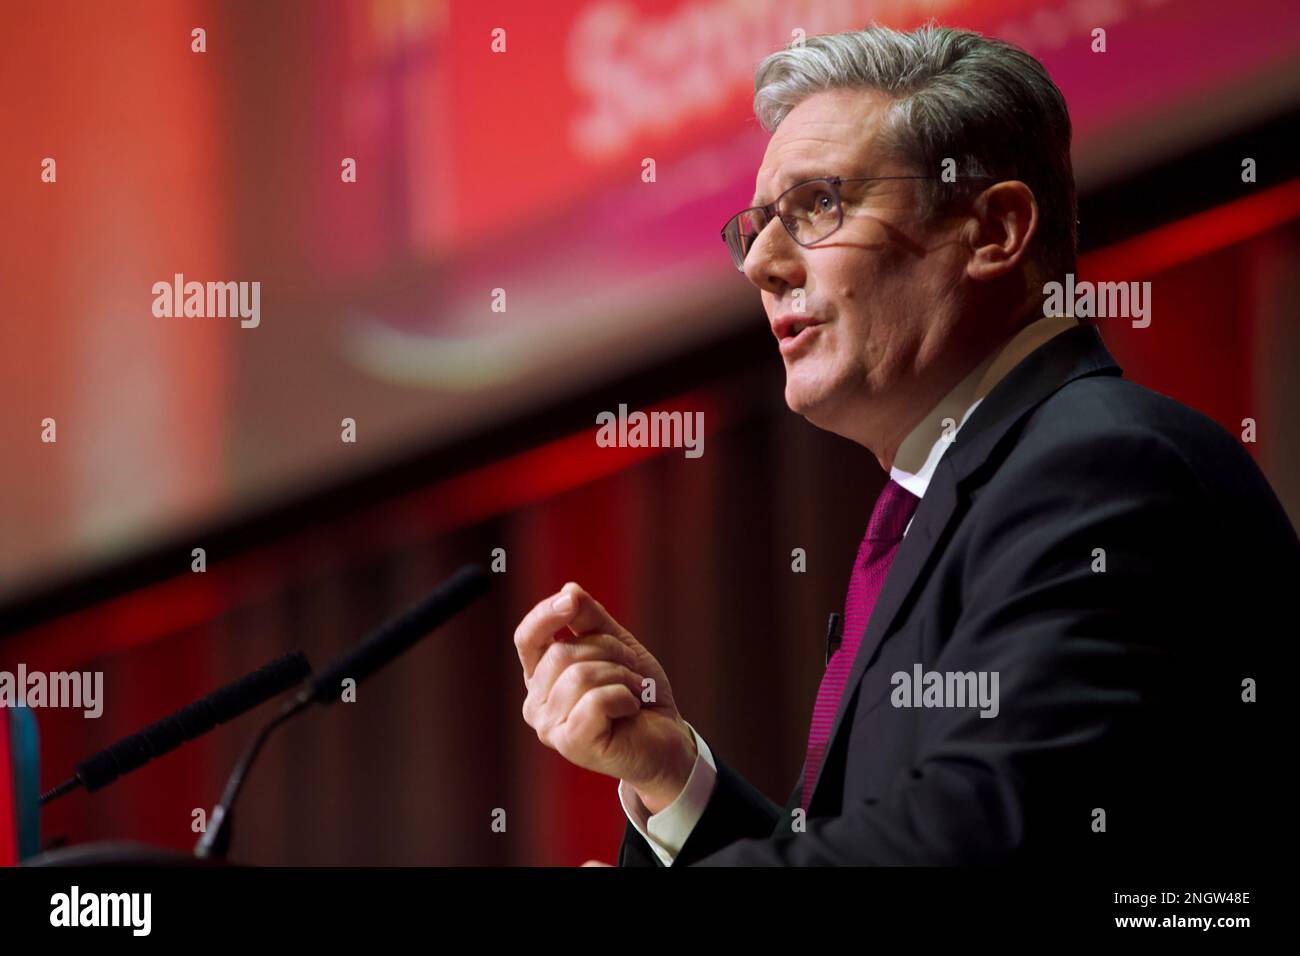 Edinburgh, UK, 19th February 2023: Labour leader Sir Keir Starmer addresses Scottish Labour Party conference. Pic: Terry Murden / Alamy Stock Photo